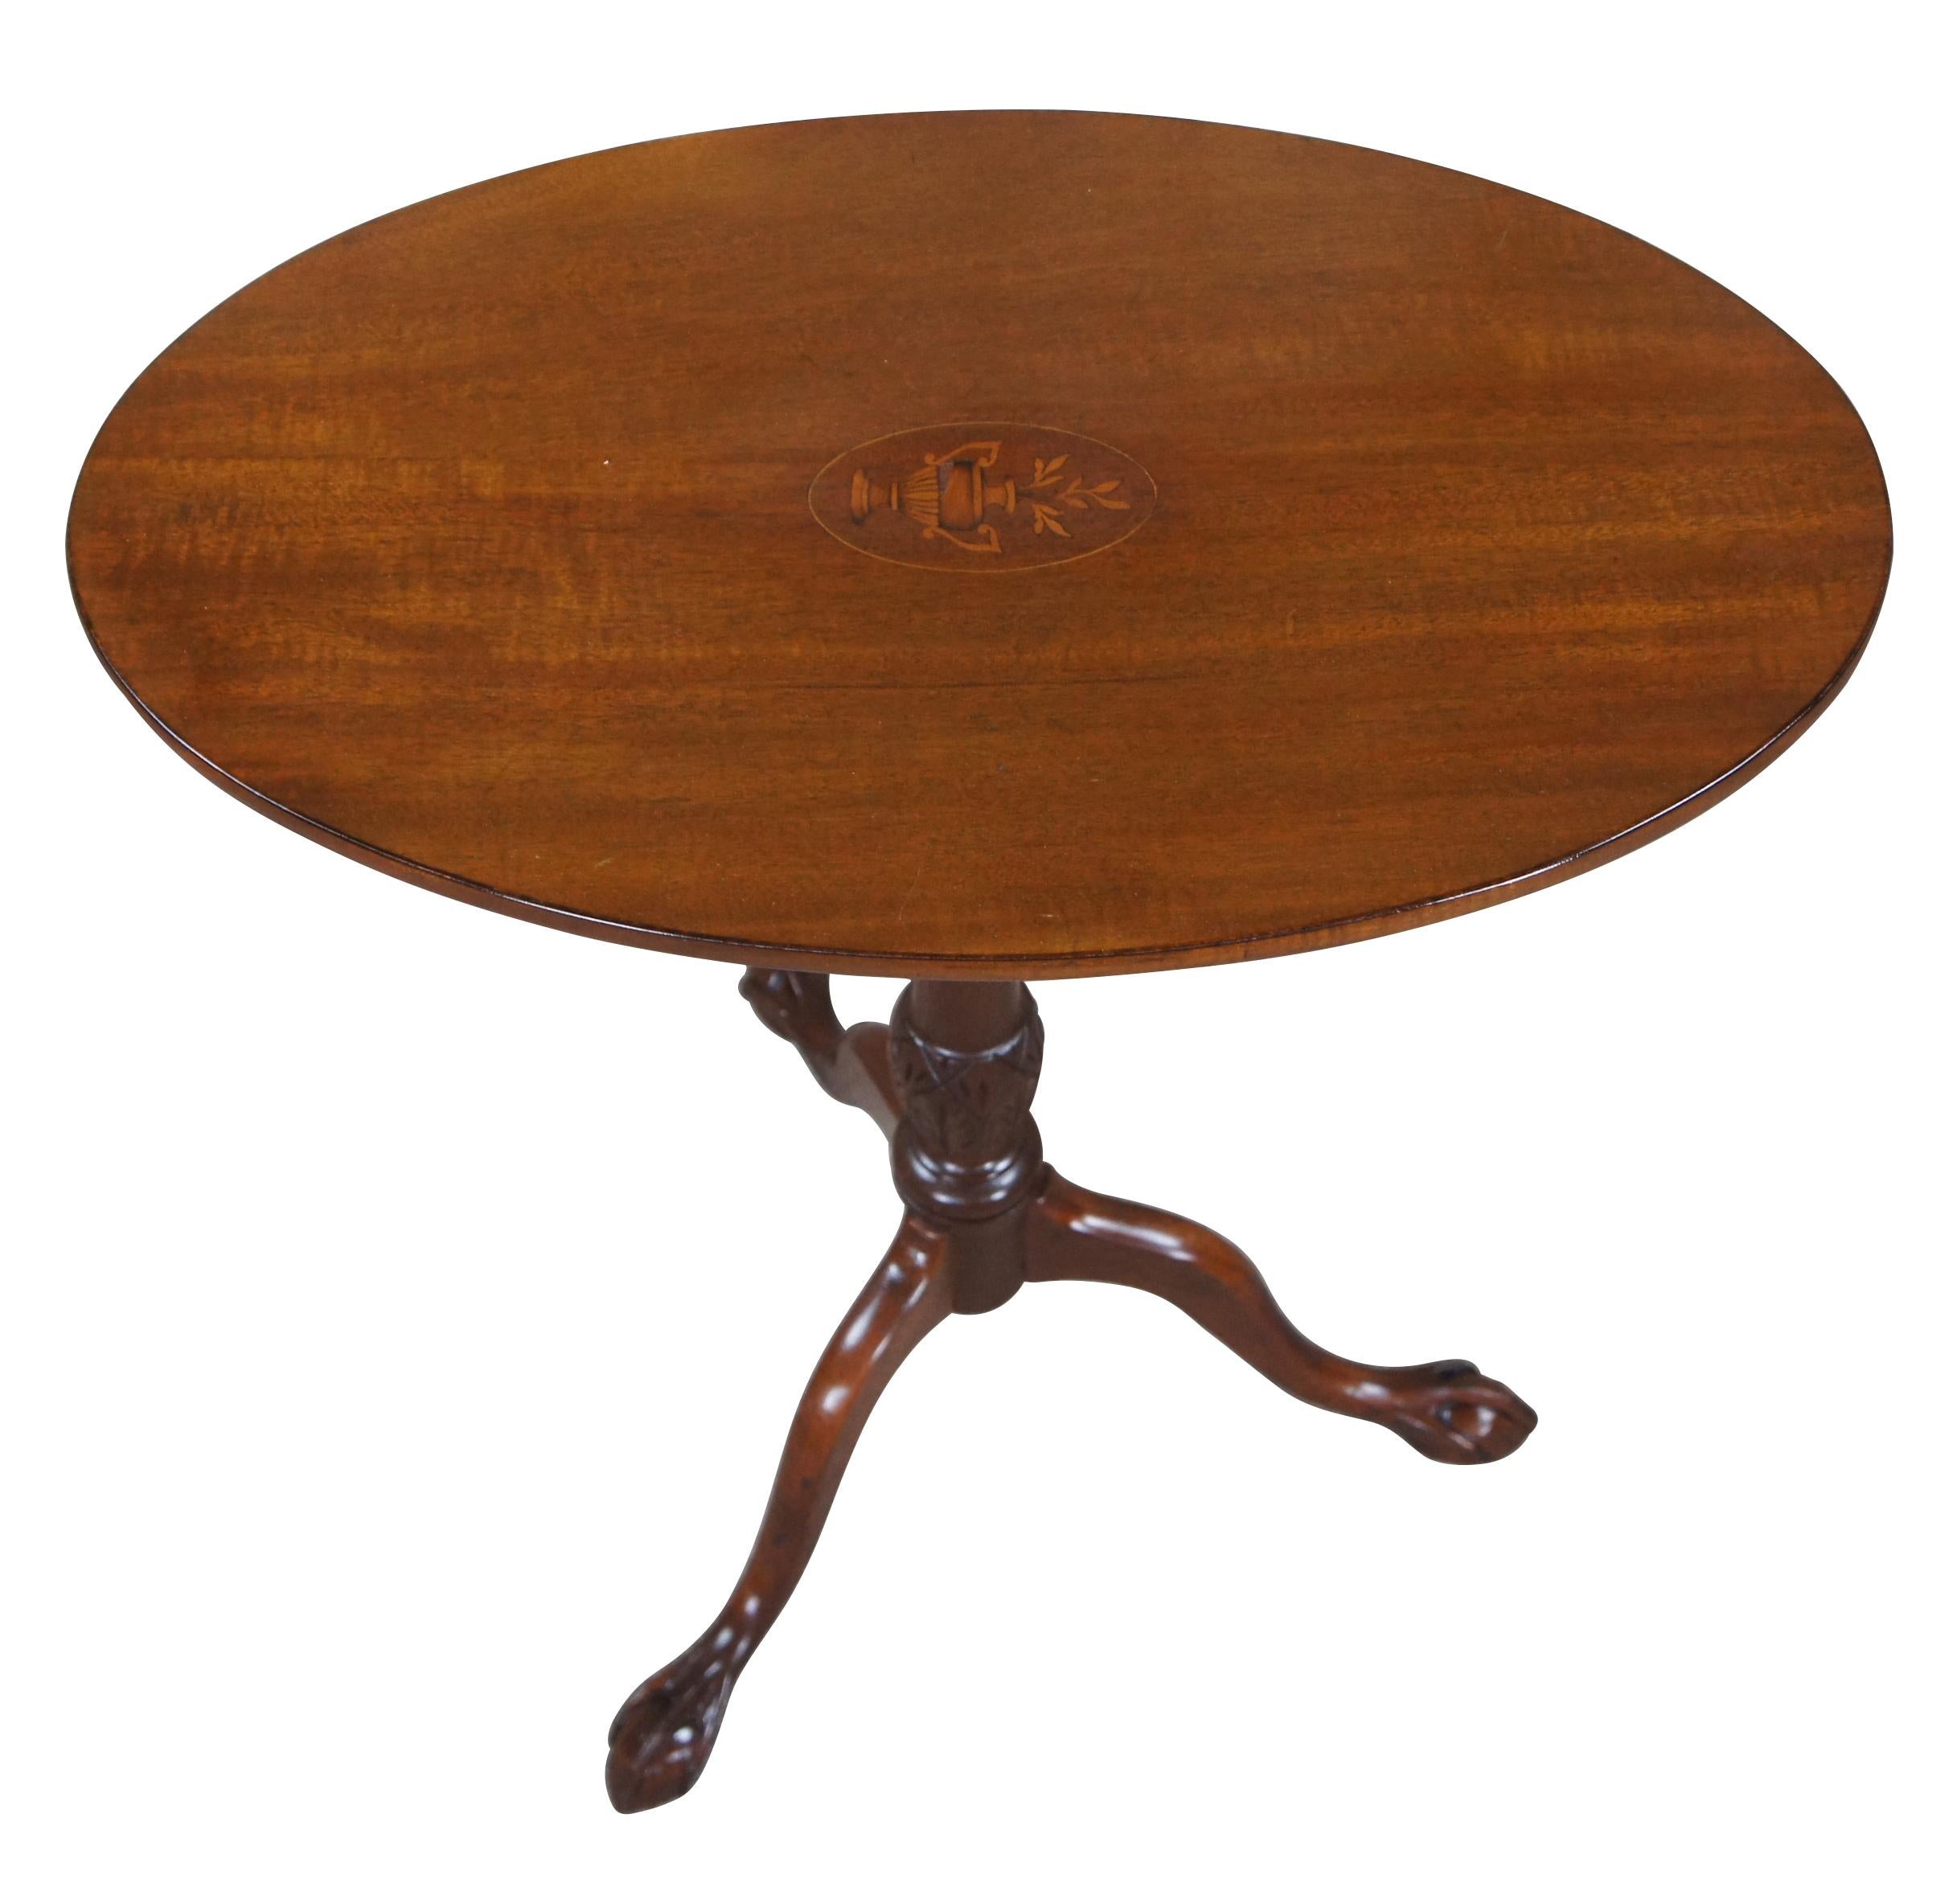 An elegant early 20th century Georgian or Hepplewhite style mahogany tilt-top tea table / candle stand.   Features an oval mahogany tabletop with inlayed neoclassical urn marquetry.  The top is supported by finely carved support, rising over three